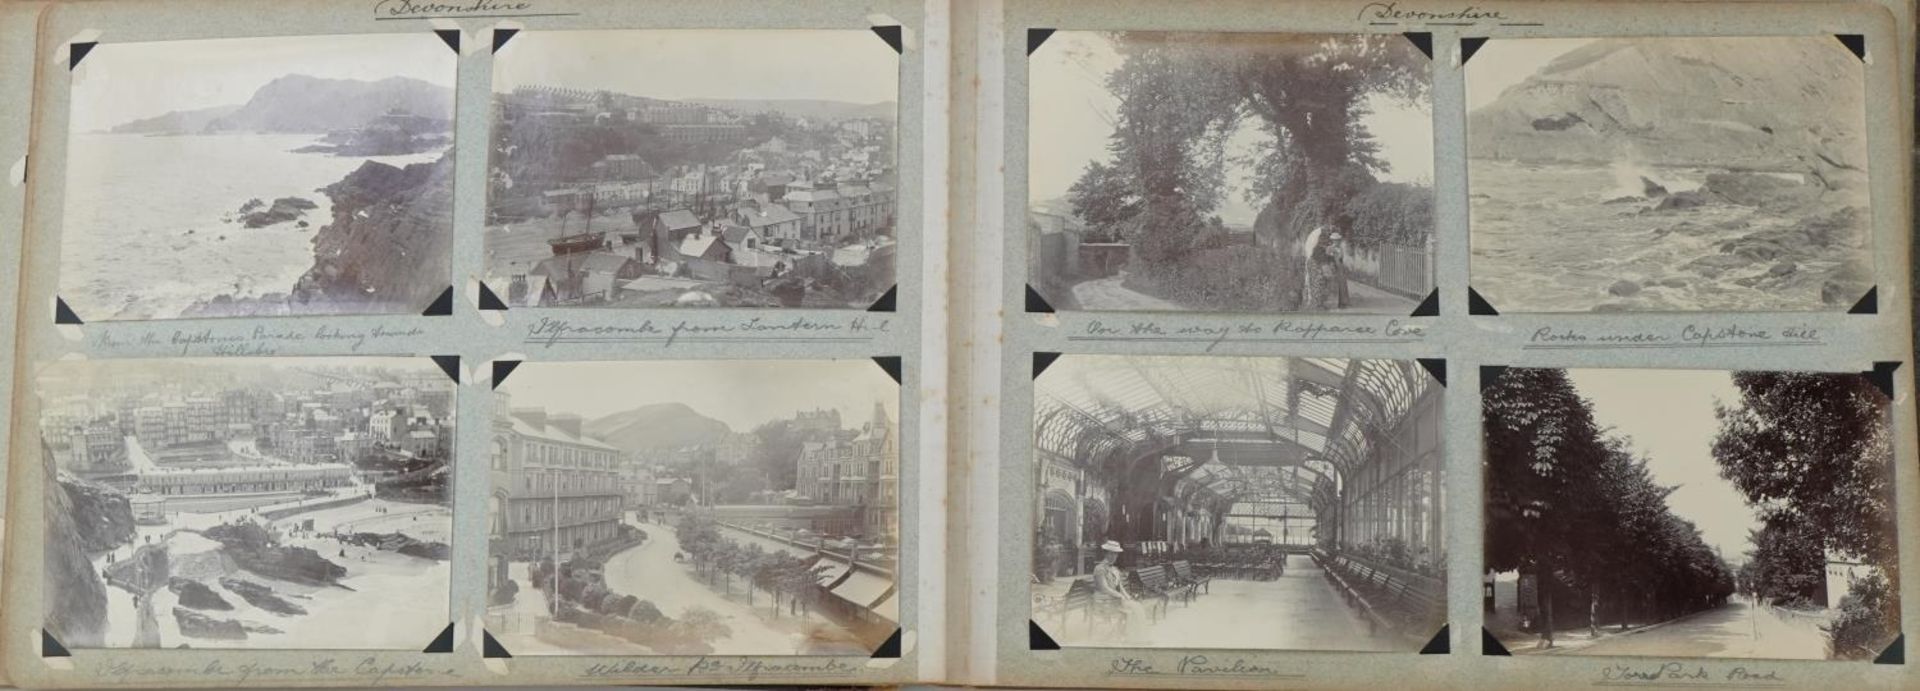 Early 20th century black and white photographs relating to the Isle of Man arranged in an album - Image 19 of 28